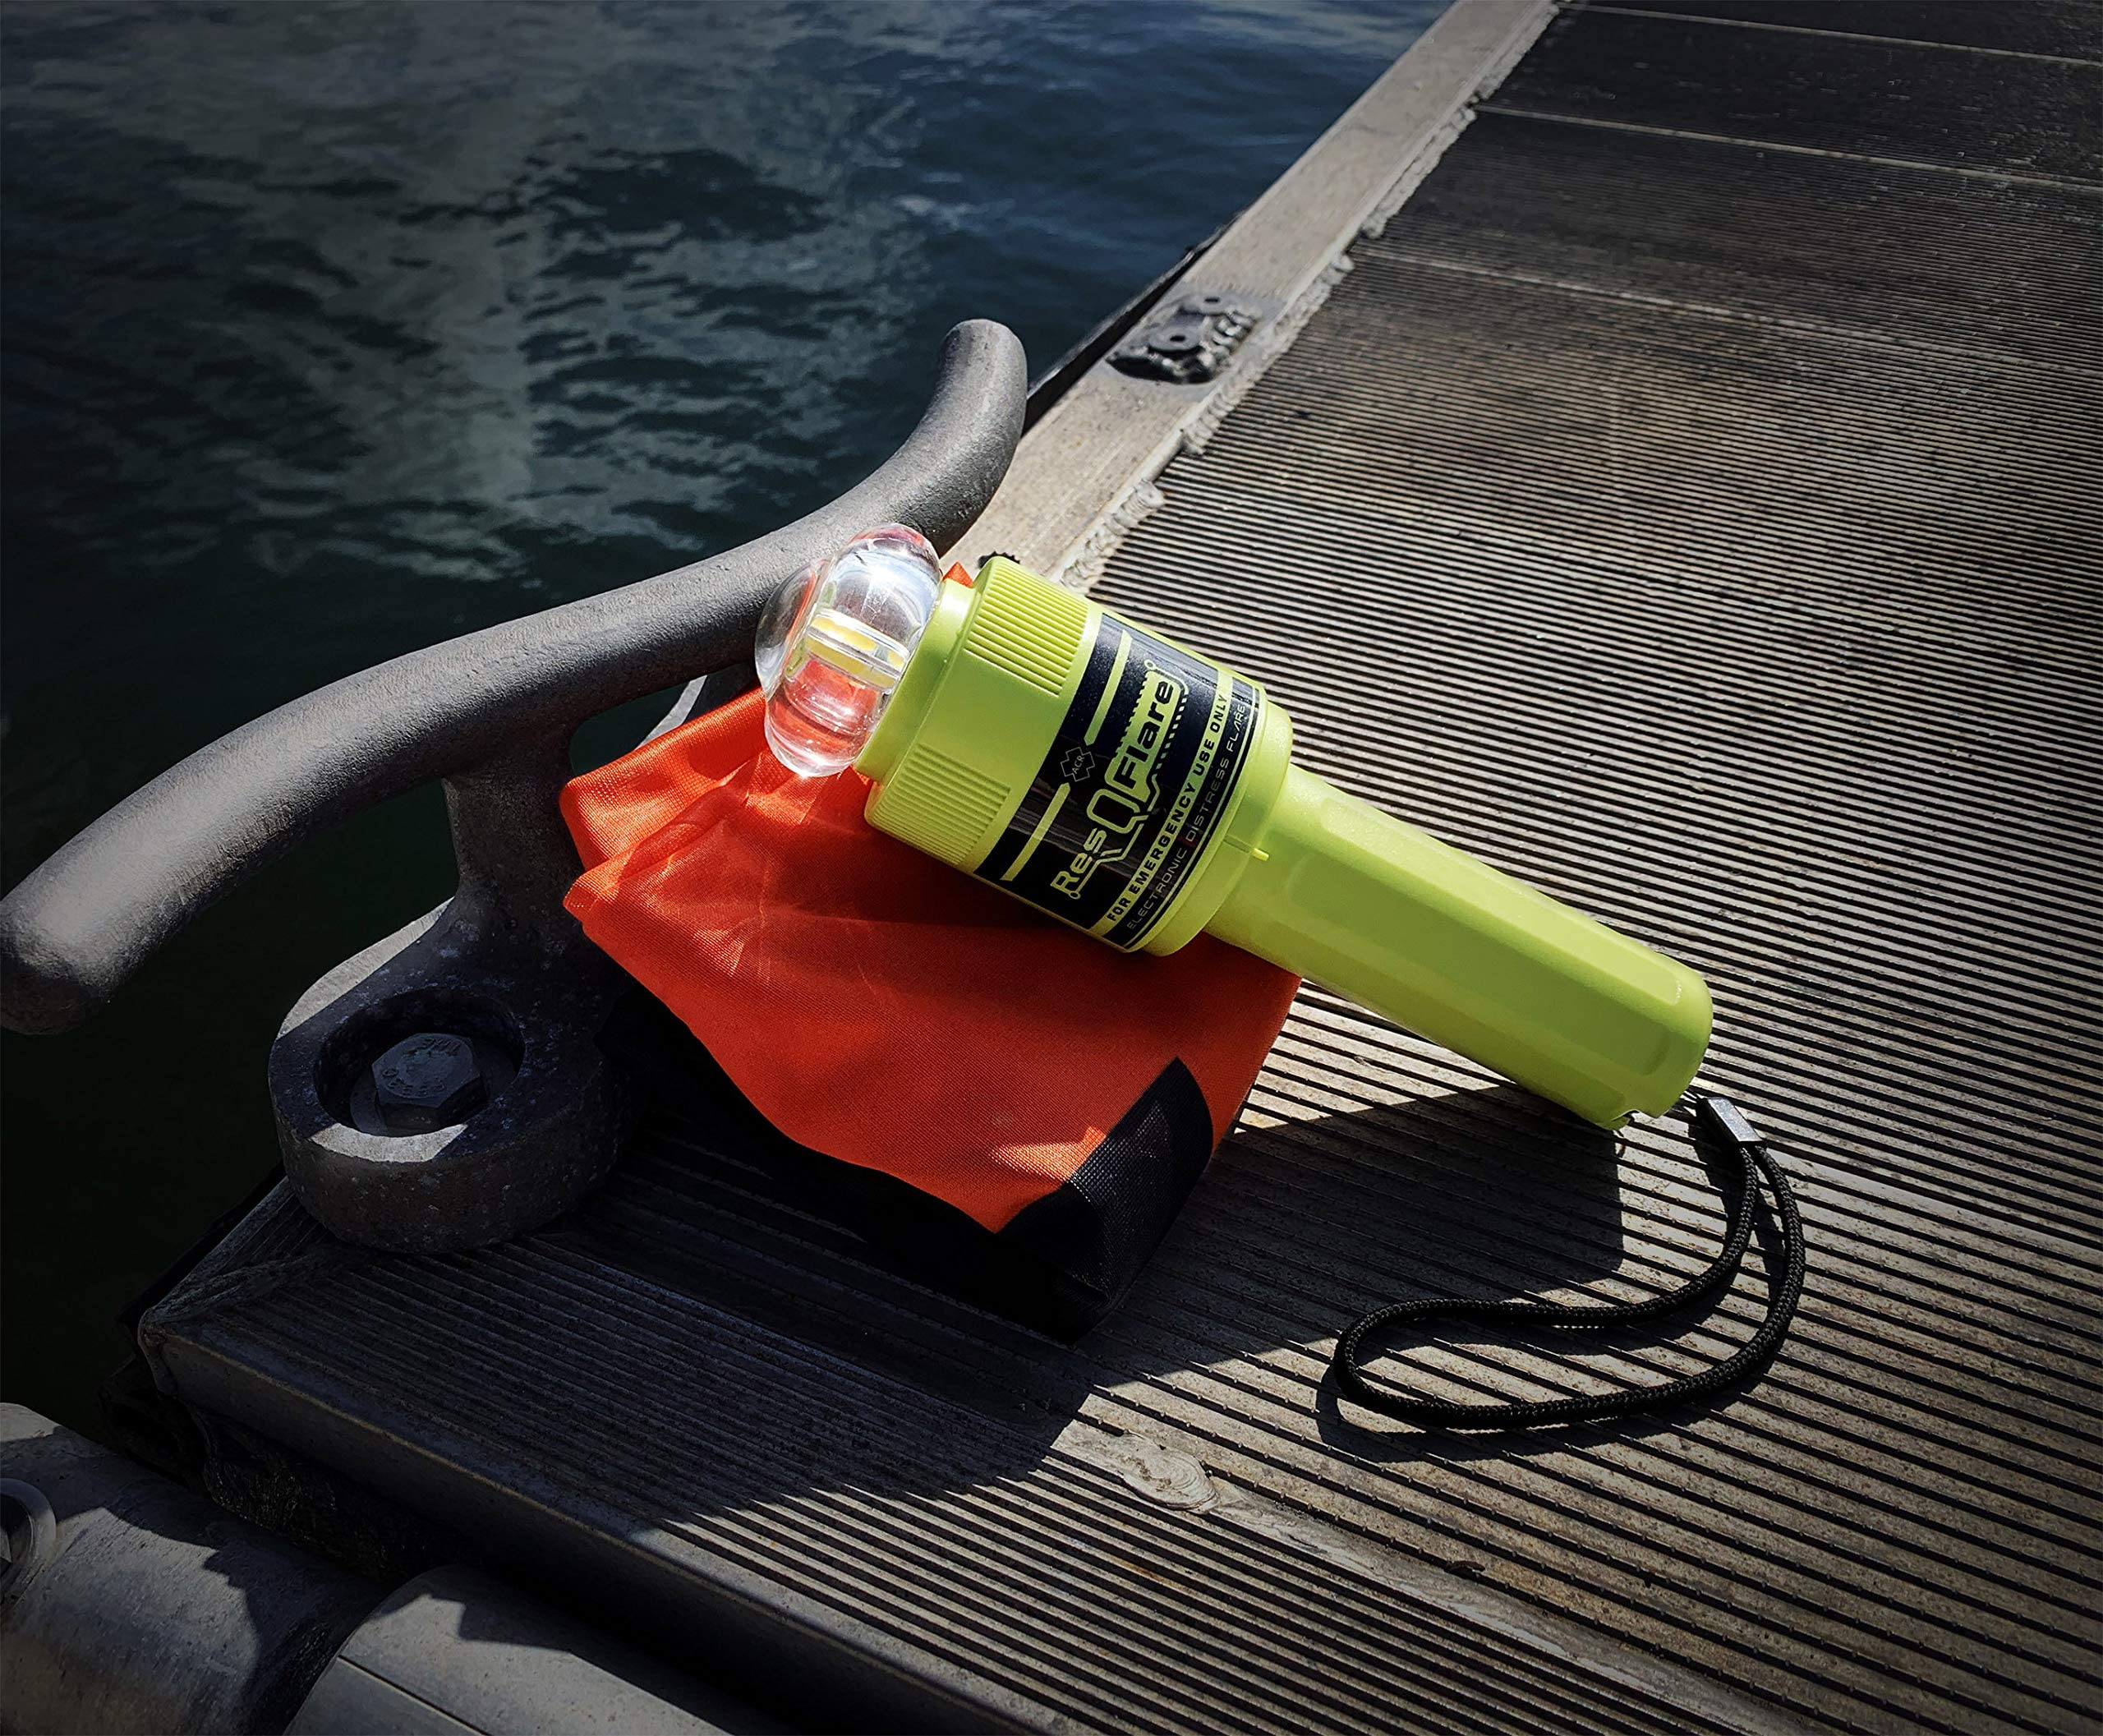 ACR ResQFlare E-Flare Safety Kit - Marine Electronic Boat Flare Meets USCG Daytime and Nighttime Coast Guard Boating Requirements